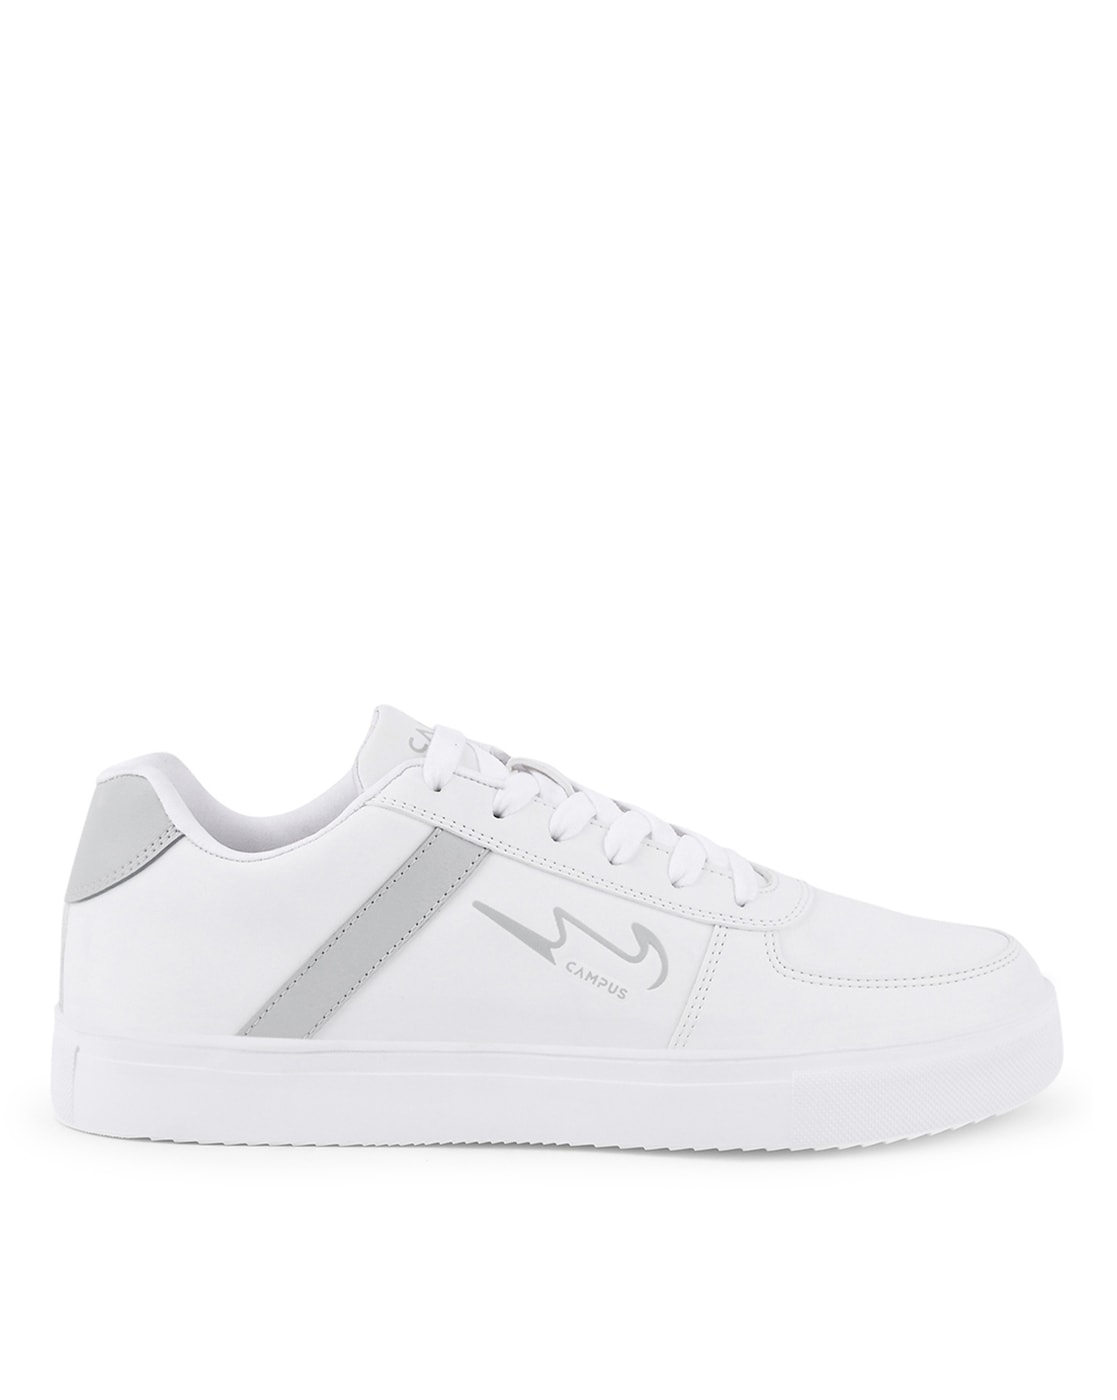 Highlight more than 154 campus white sneakers best